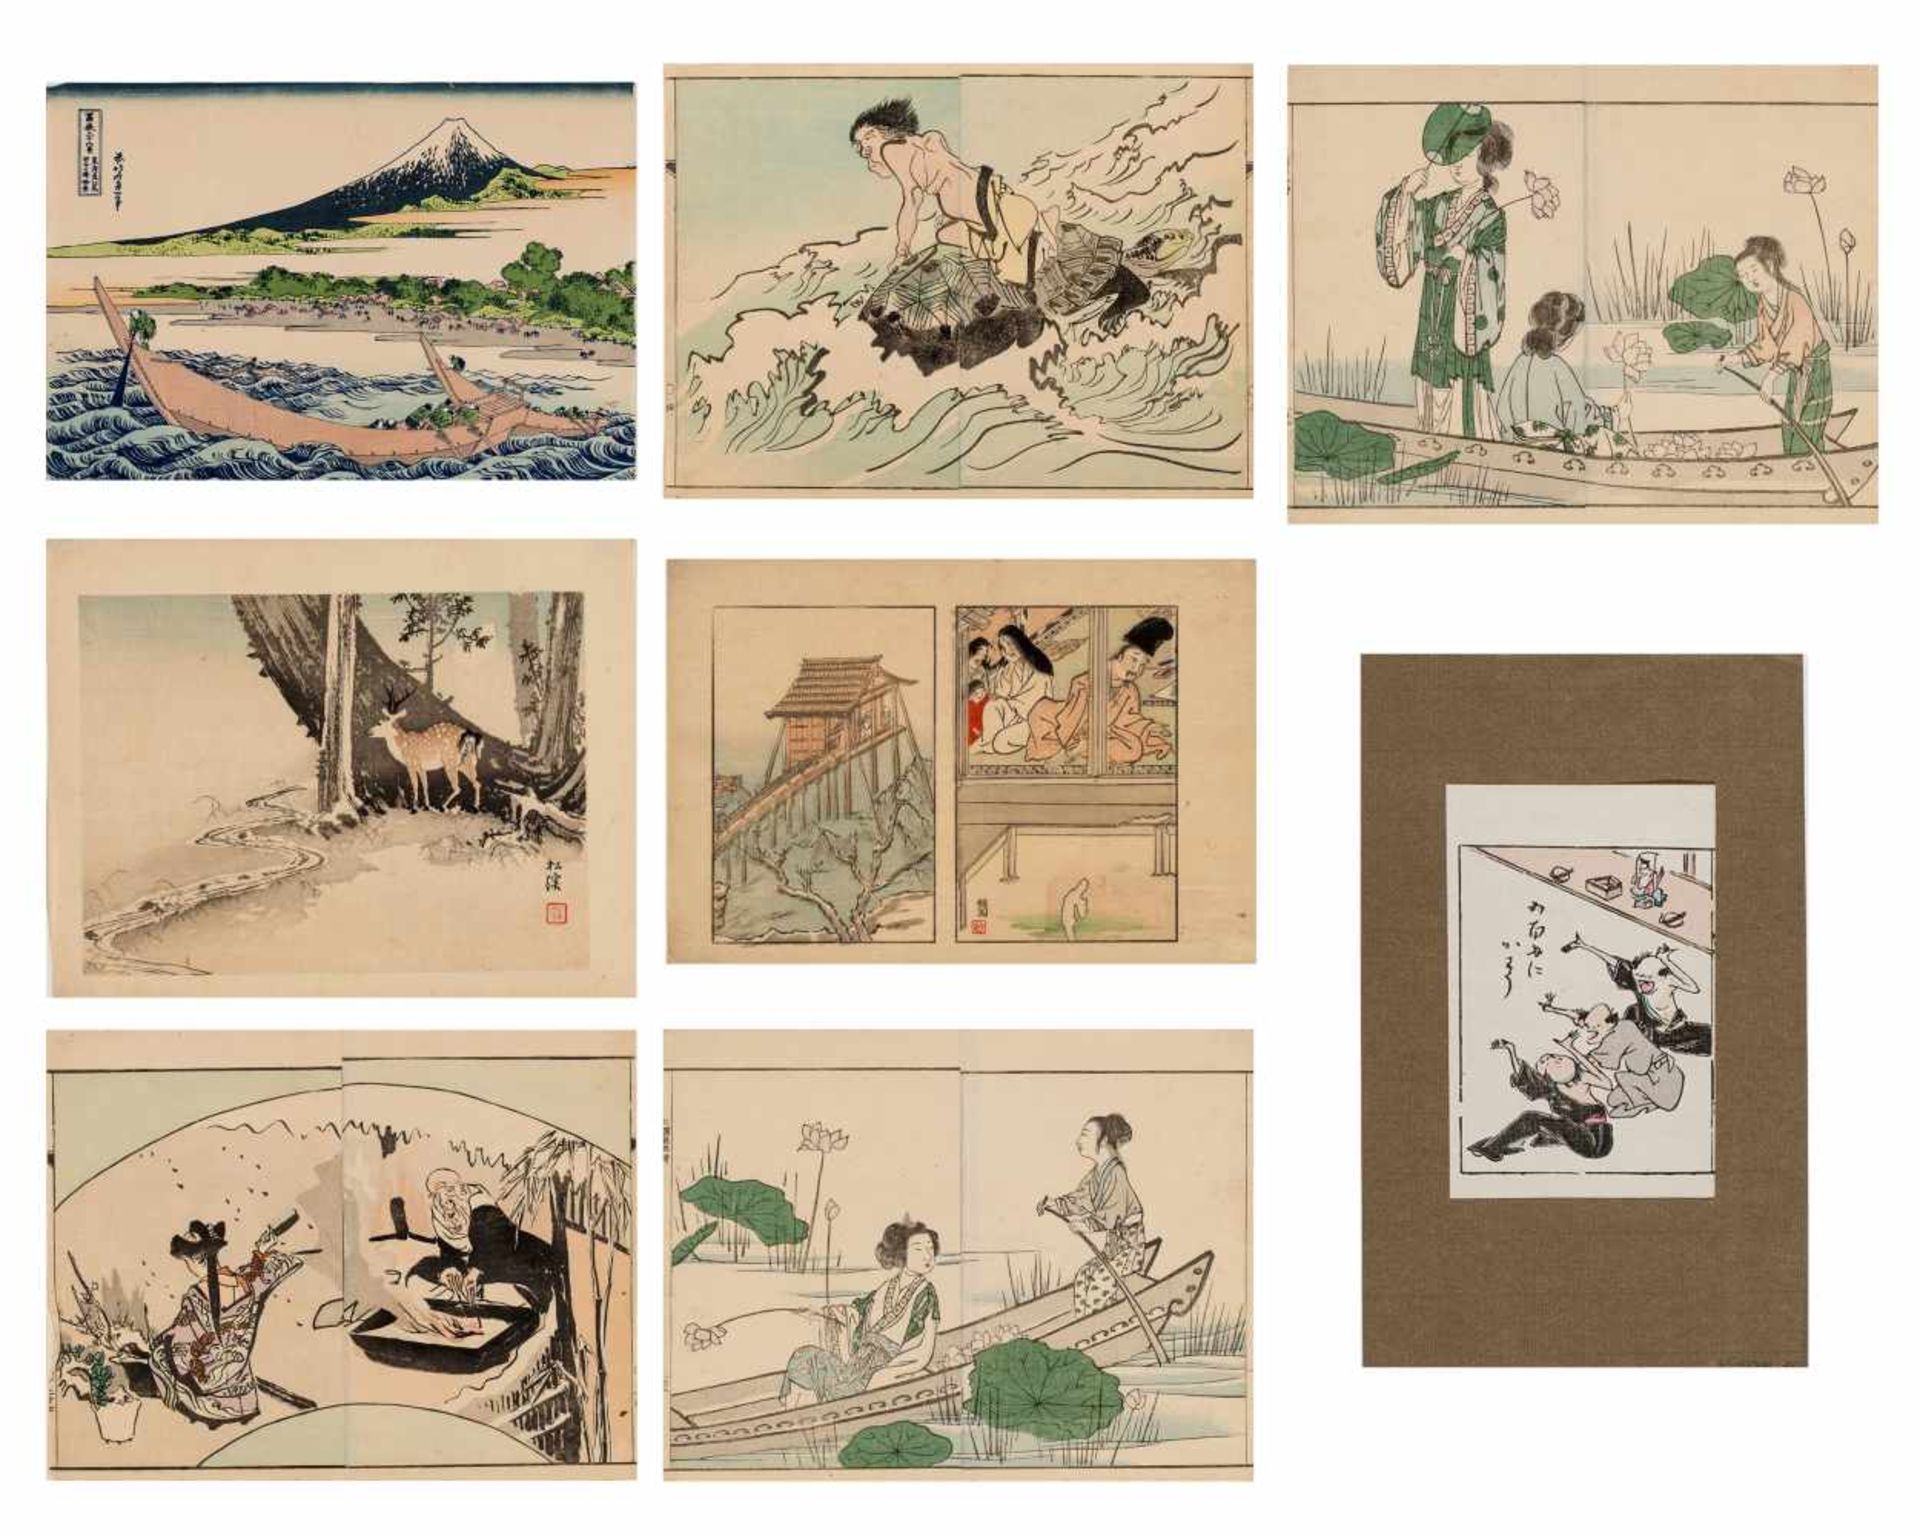 EIGHT JAPANESE COLOR WOODBLOCK PRINTS, 19TH-20TH CENTURYOriginal color woodblock printsJapan, 19th-